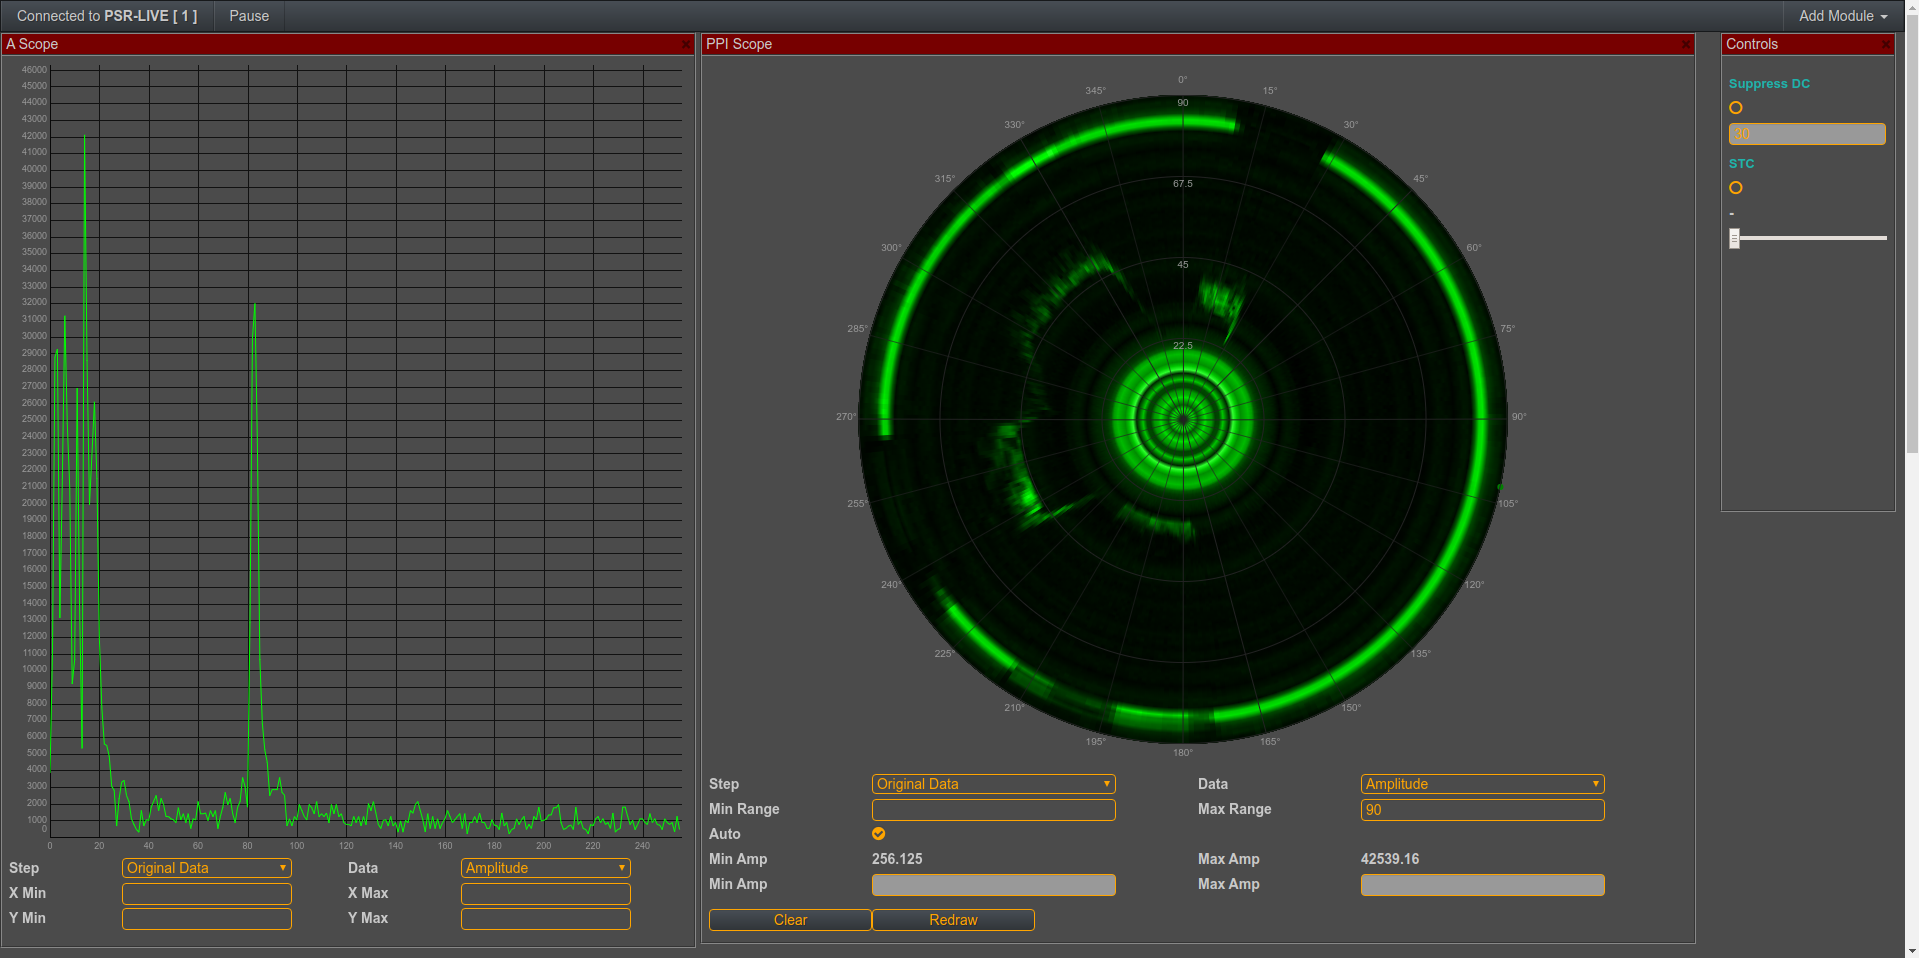 PSR Radar. We brought the radial resolution to 3.75 cm at up to 10 m. This is 4 times better than competition